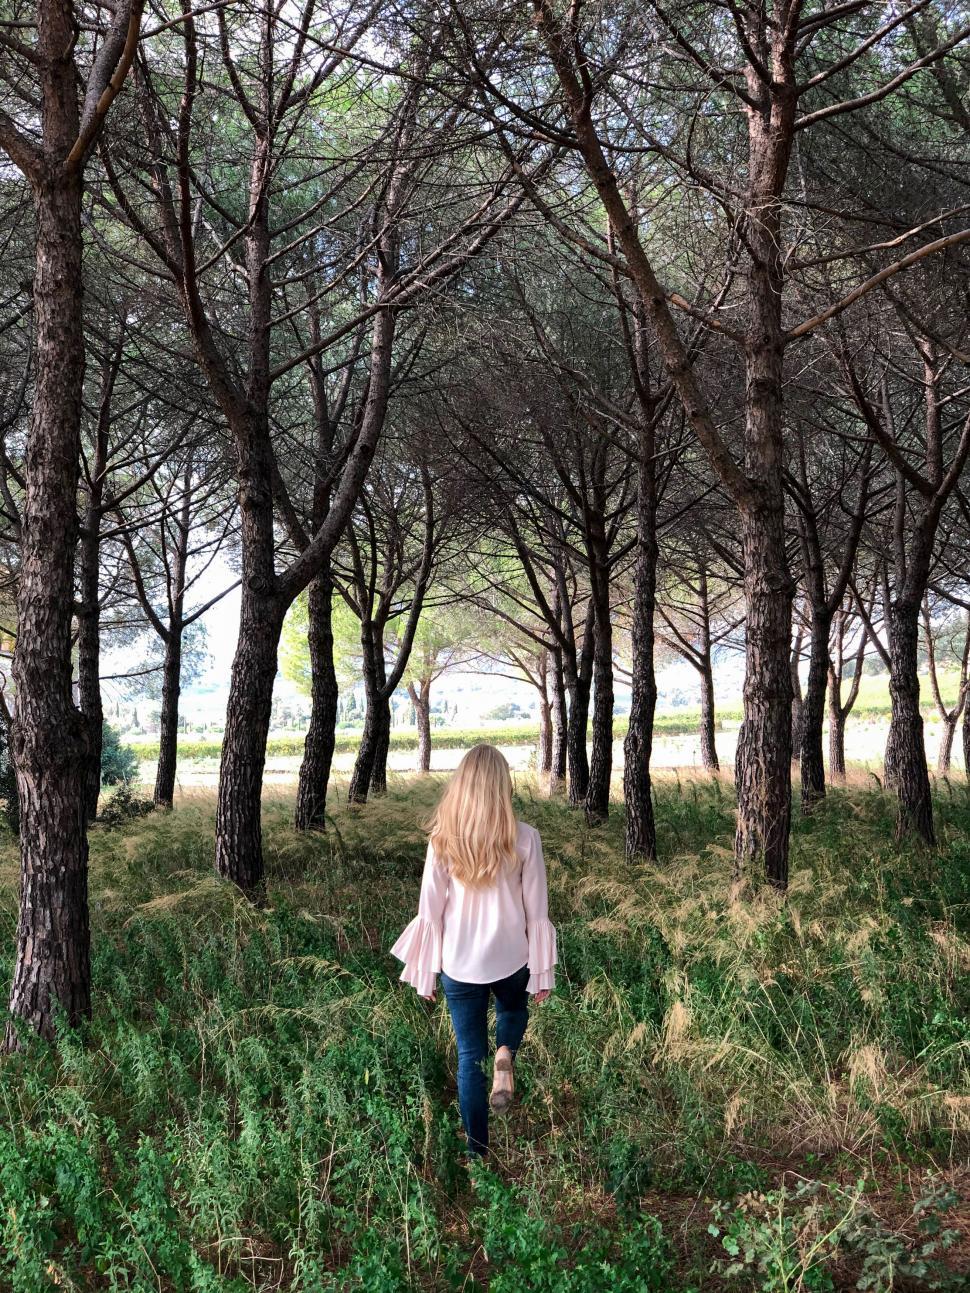 Free Image of Woman walking through a pine tree forest 